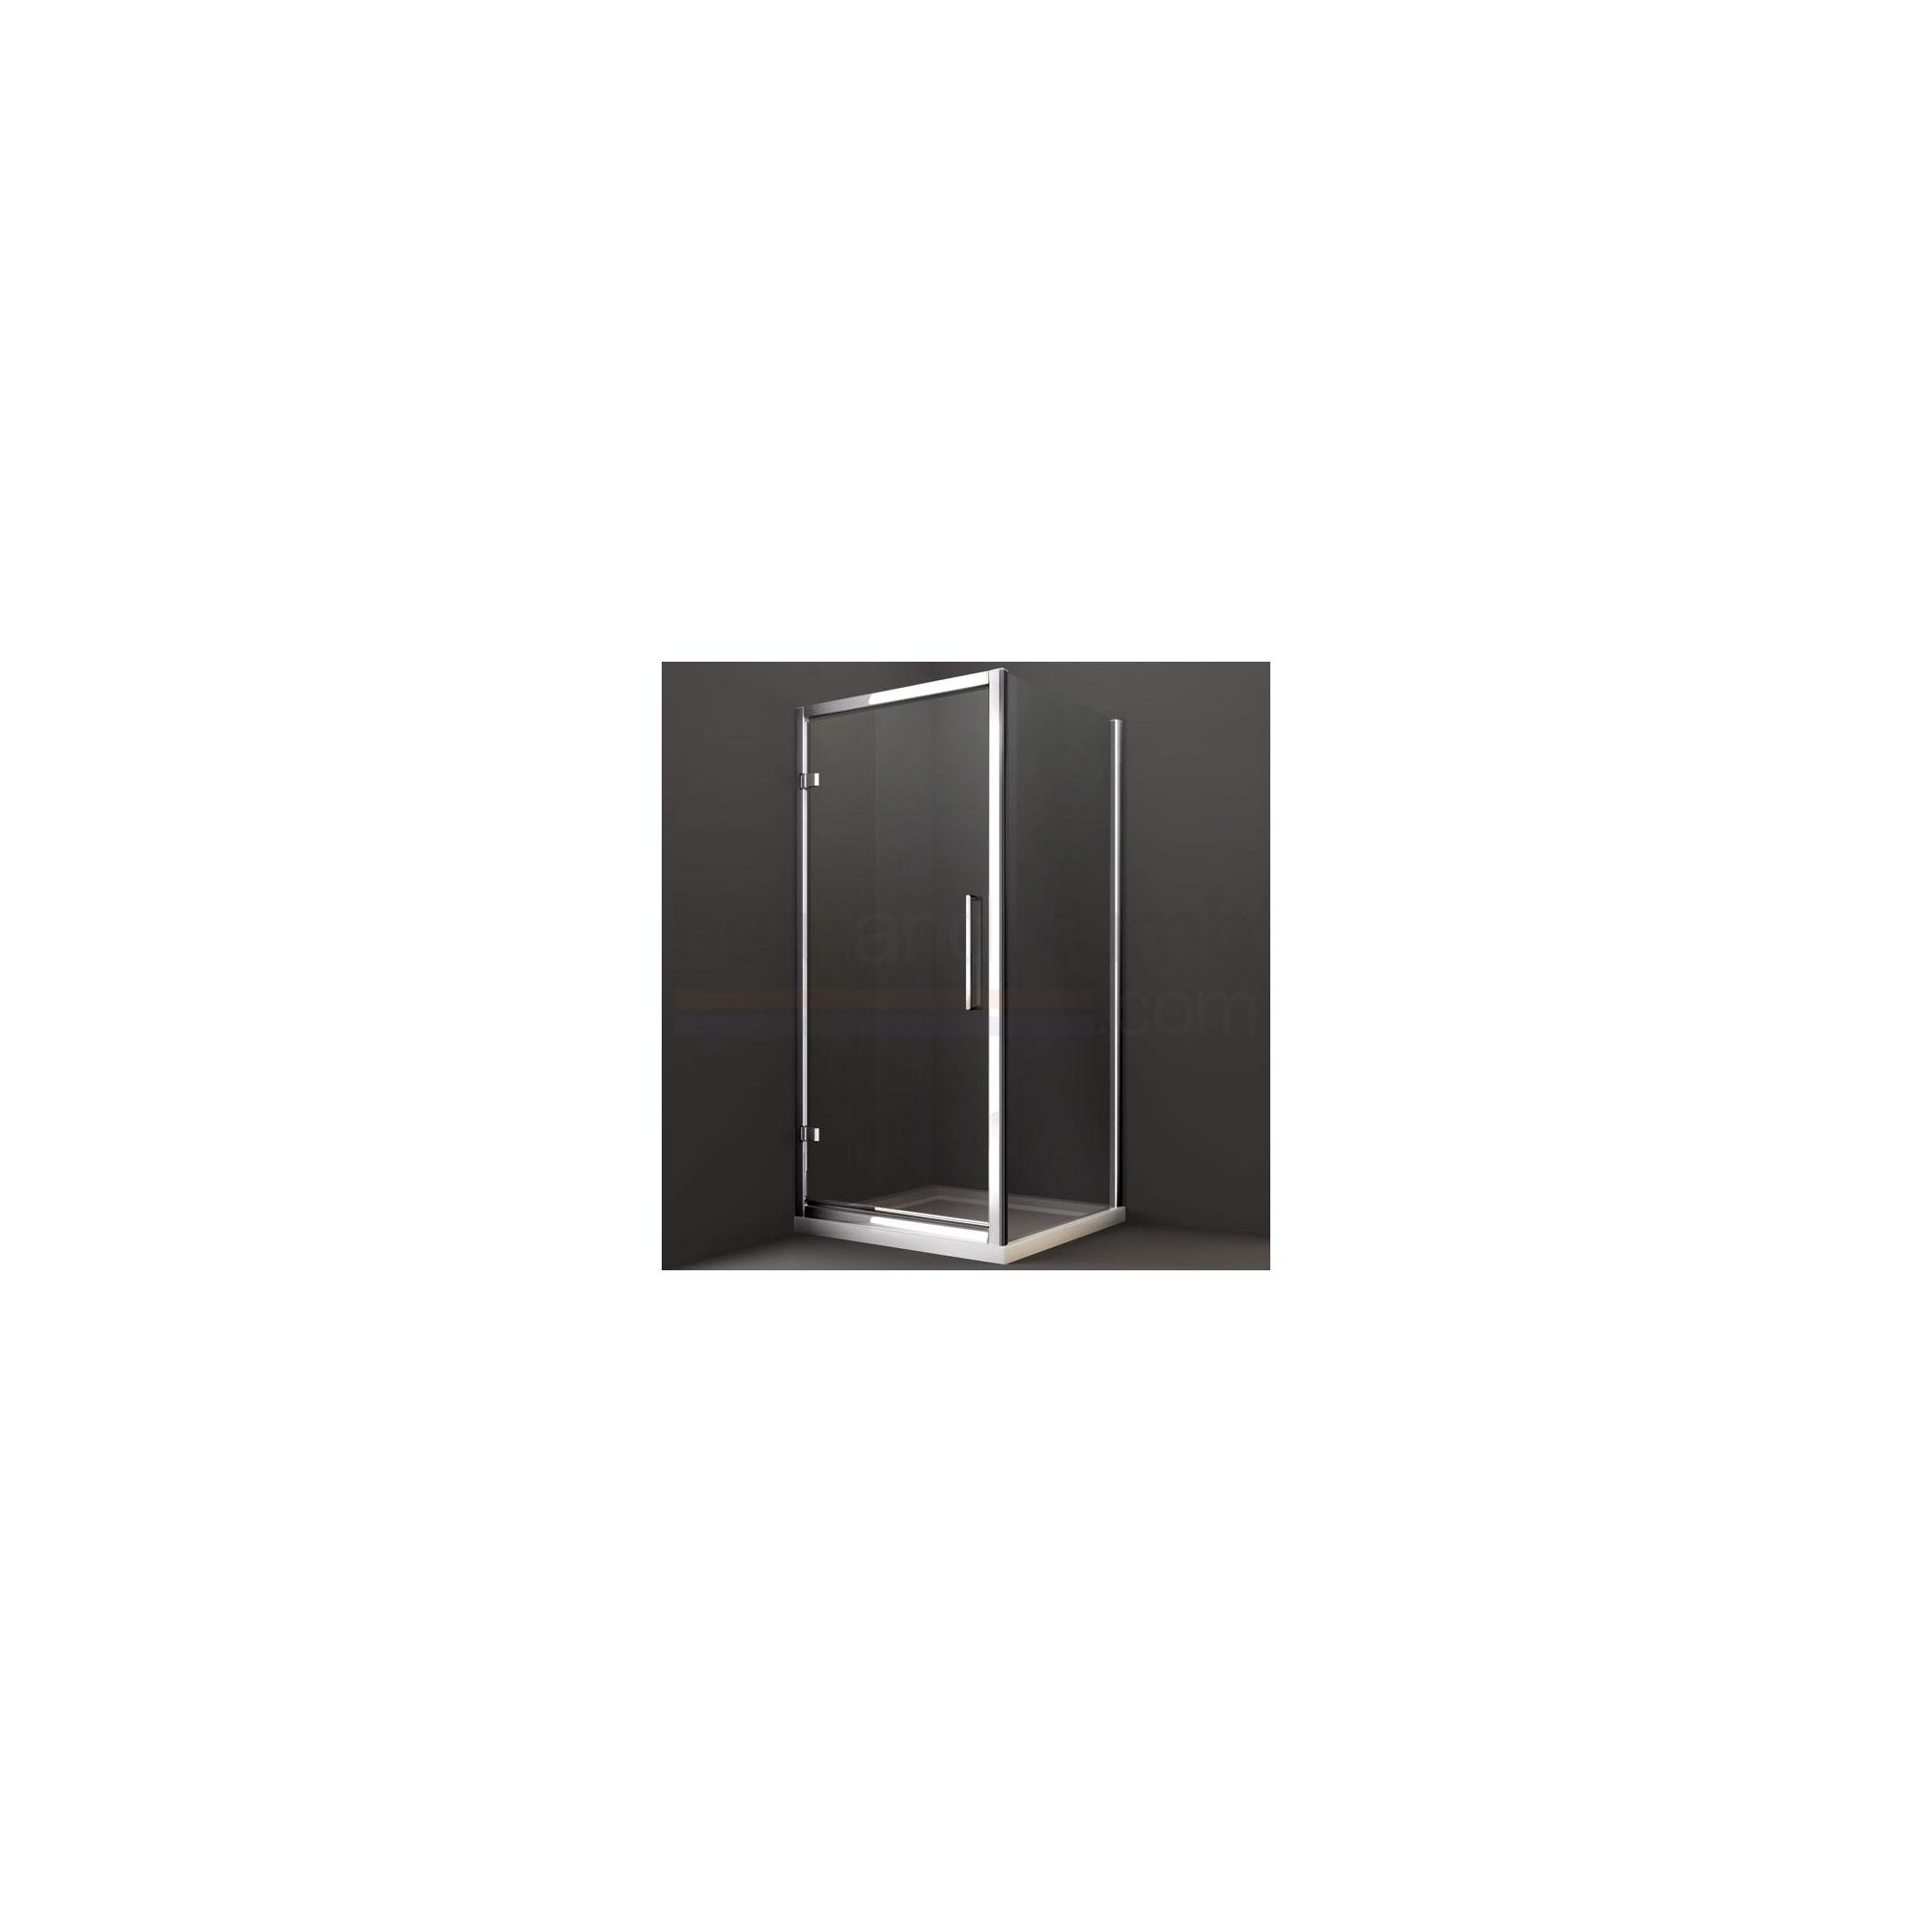 Merlyn Series 8 Hinged Door with Side Panel Shower Enclosure, 800mm, Low Profile Tray, 8mm Glass at Tesco Direct